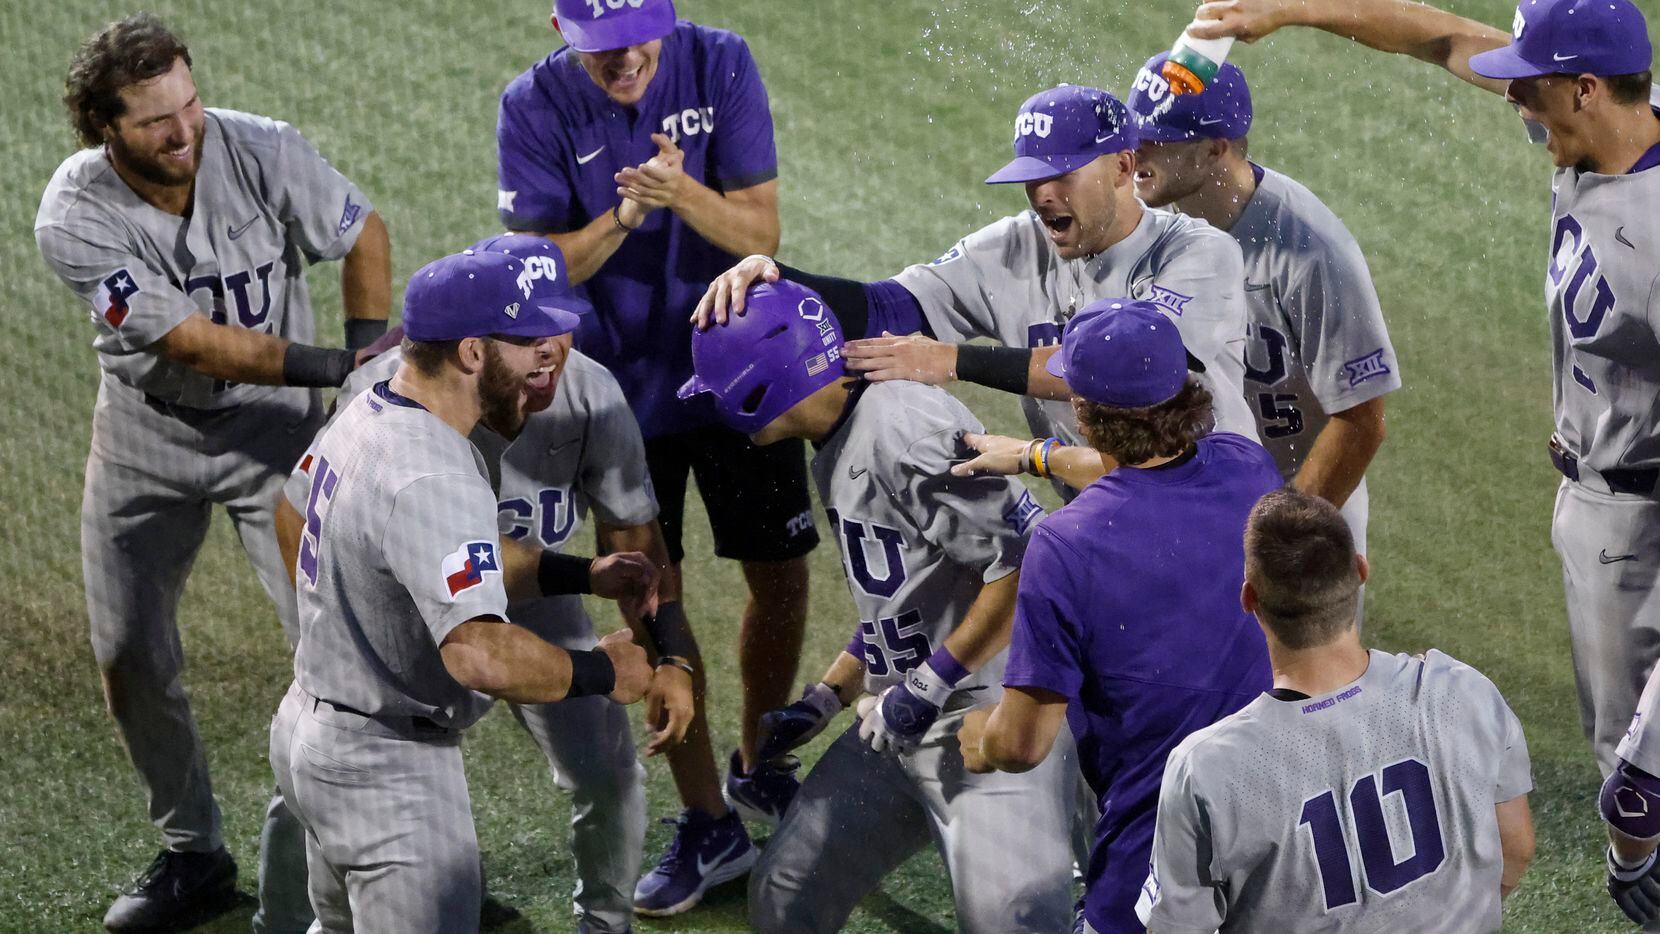 TCU infielder Brayden Taylor (55) is mobbed by teammates after he hit a solo home run...